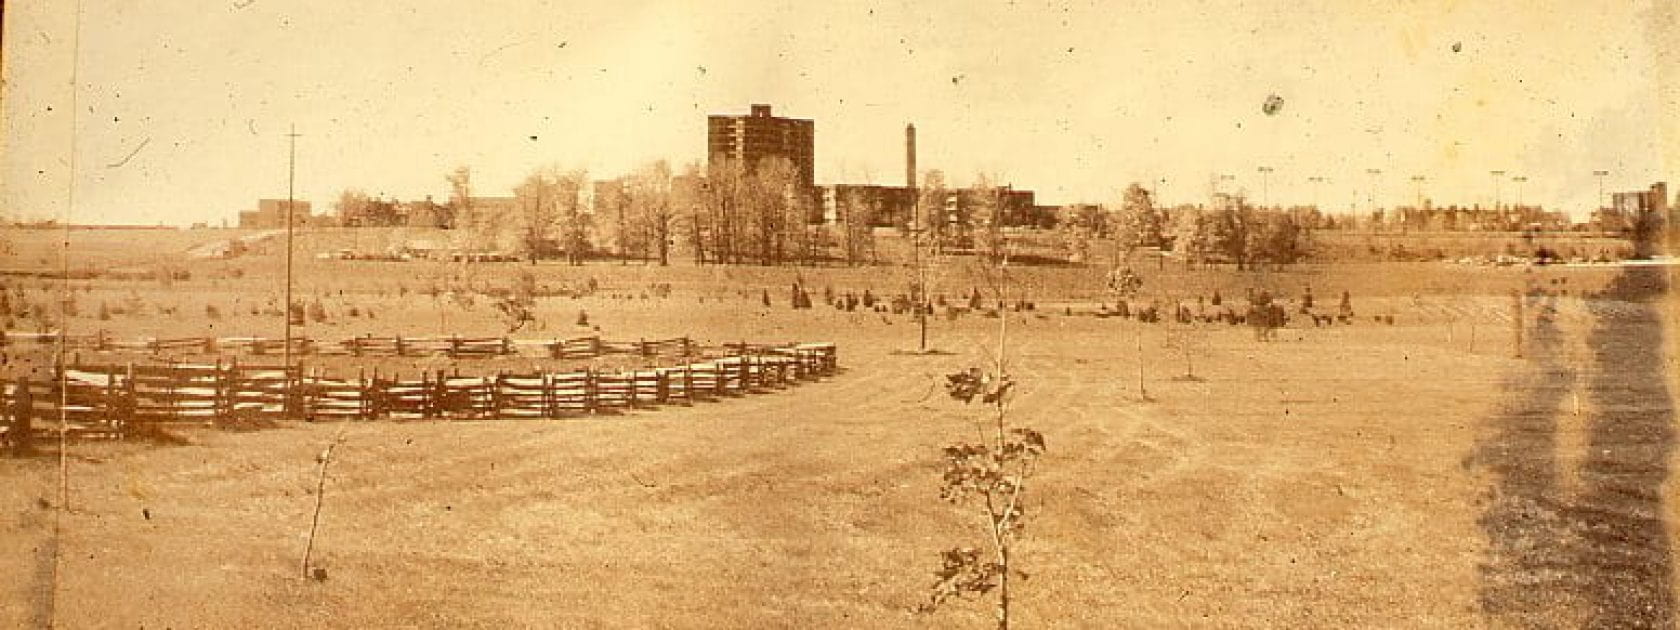 A field of small saplings is bordered by a wooden fence on the left. The University of Guelph's brick buildings can be seen in the background.